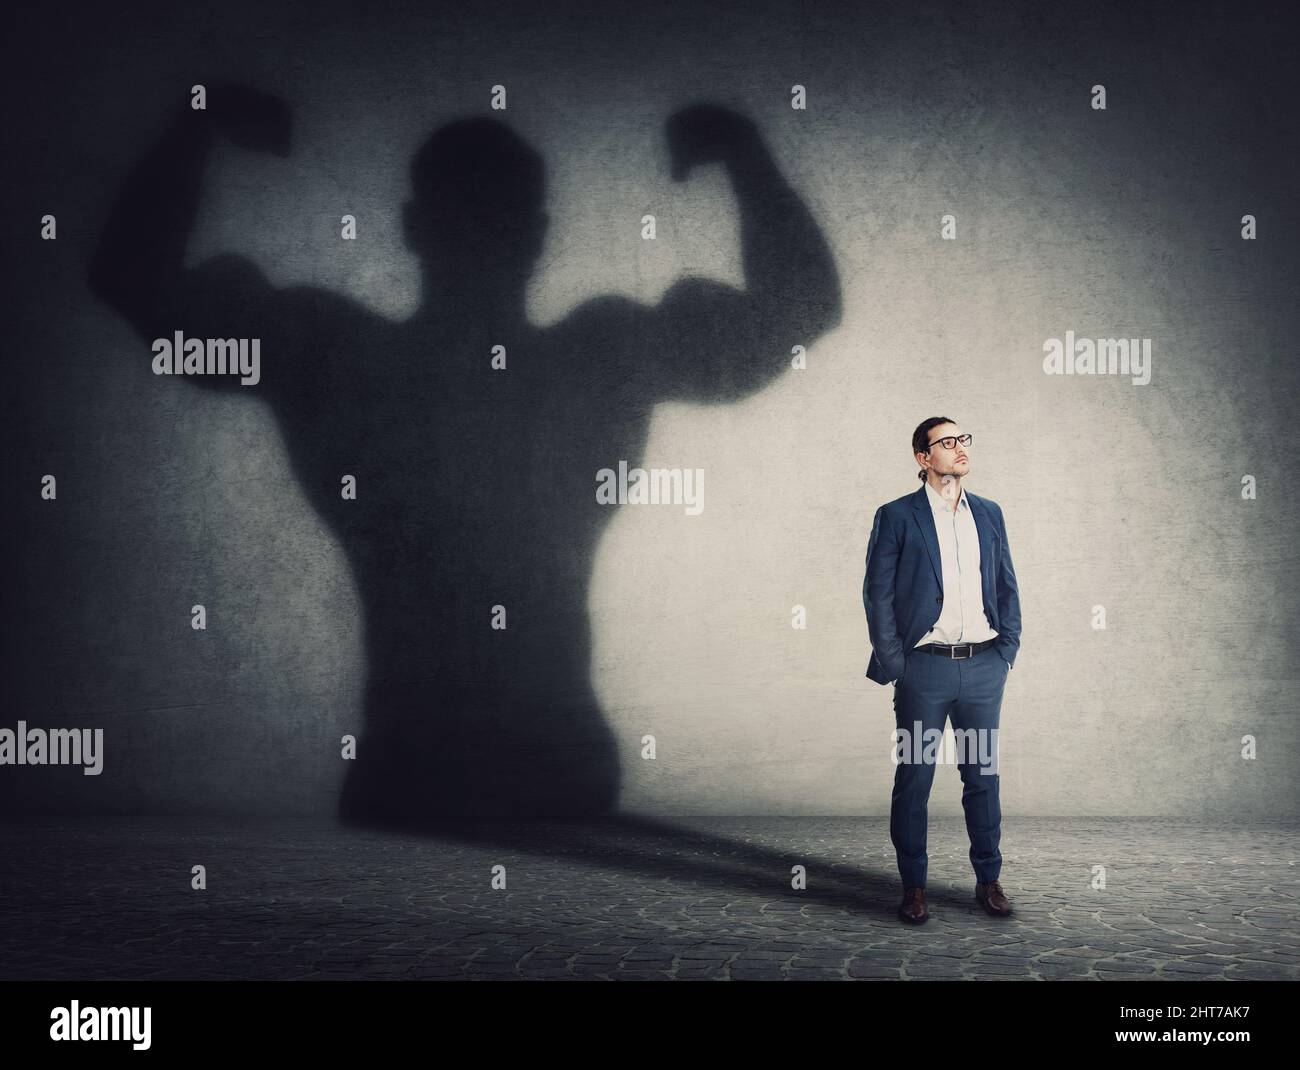 Confident businessman keeps hands in his pockets while casts a powerful person shadow on the wall behind. Business person transformation as metaphor f Stock Photo